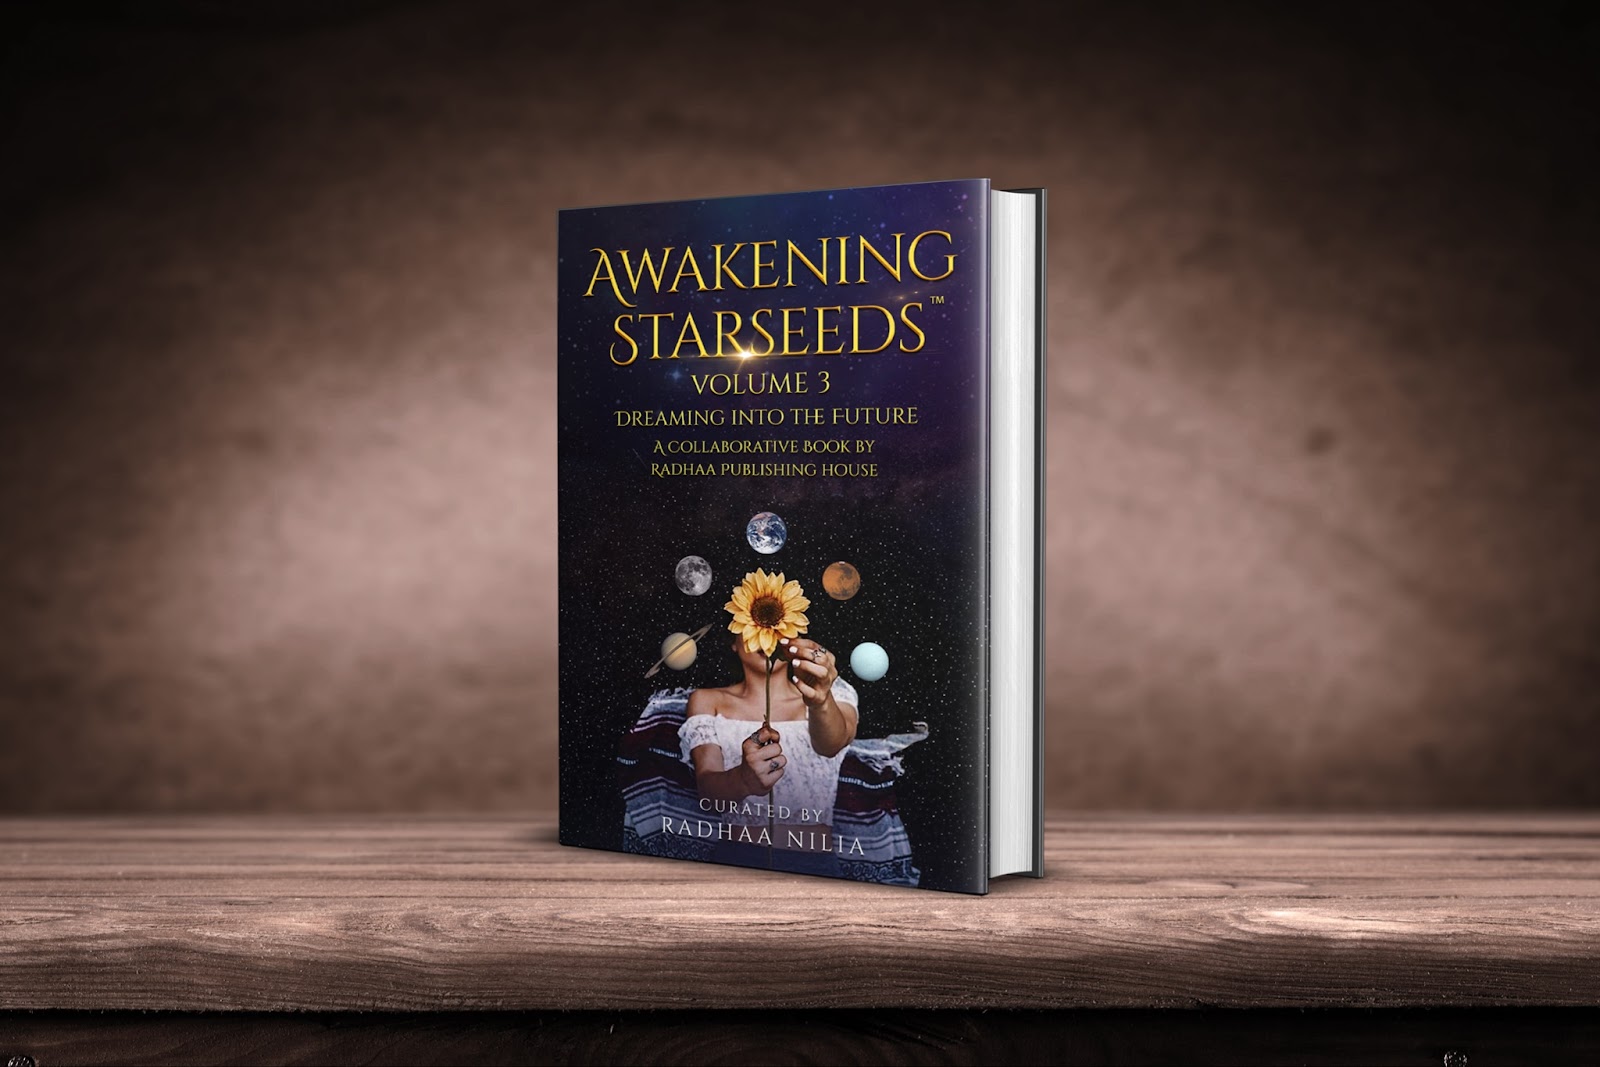 The Awakening Starseeds Book Series is an ongoing, multi-year-long global collaboration project. Featuring a new collection of visionary authors pioneering transformation in every consecutive volume. Think Harry Potter for readers at the cutting edge of consciousness. As old paradigm structures are crumbling and millions of people are gripped by fear and despair, a wave of awakening Souls and Starseeds spans the globe, spreading the message of freedom, renewal, hope, and the promise of a great Neo-Renaissance for humanity. Chapter by chapter, readers find themselves inspired to think beyond old, ingrained belief systems as they reach into their hearts and minds to step into the future they've always dreamed of.

